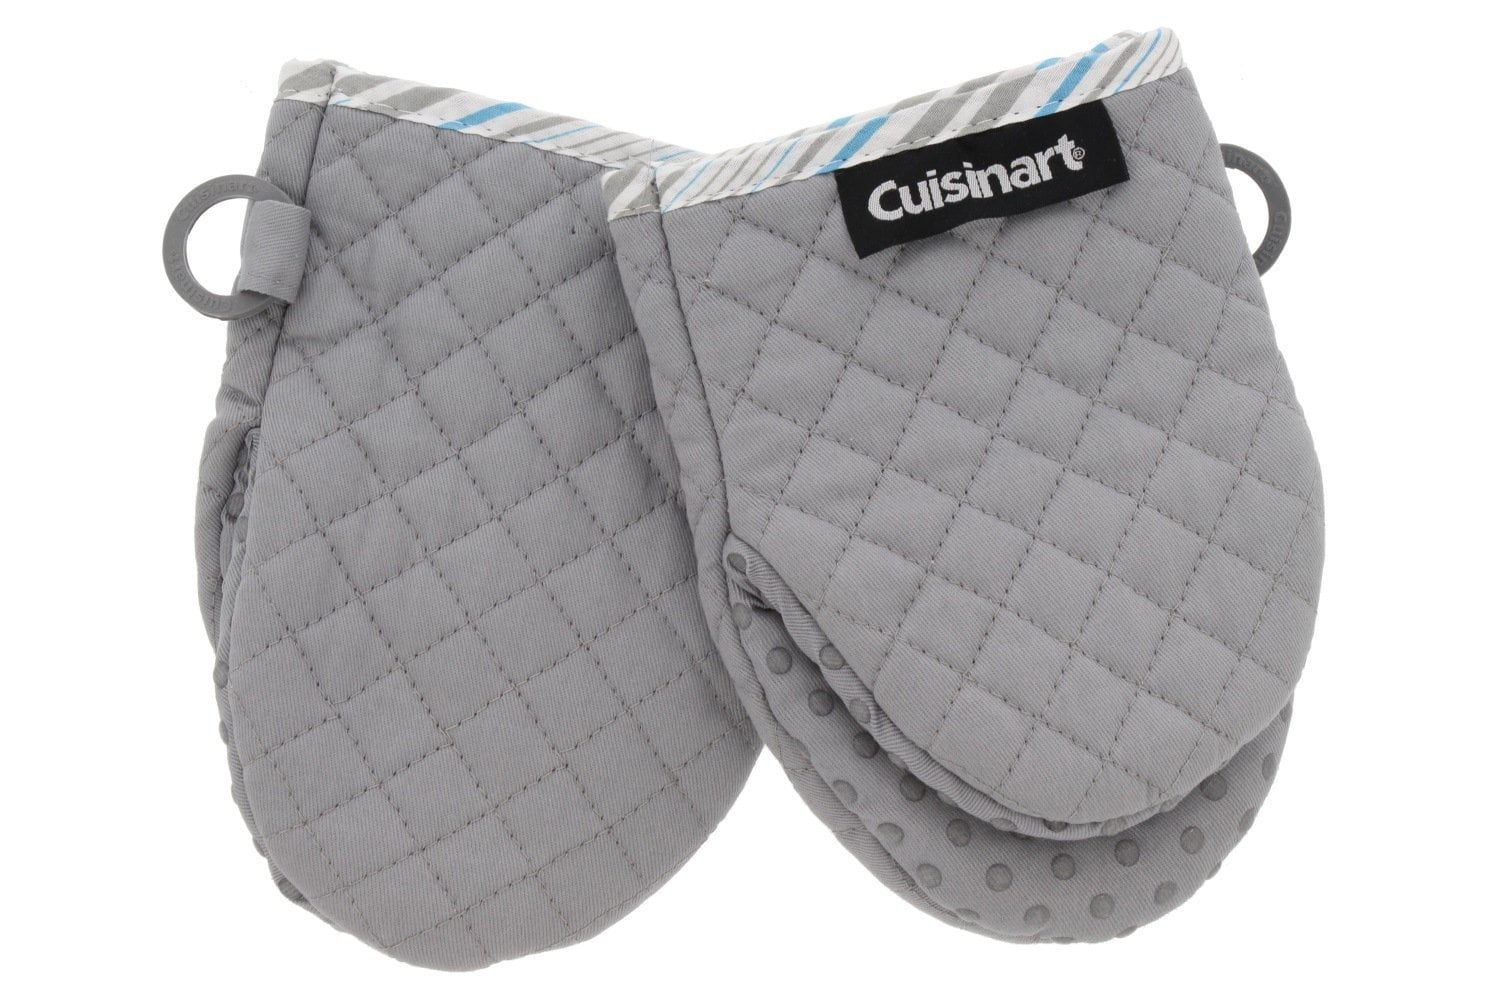 Cuisinart Quilted Mini Kitchen Oven Mitts/Gloves w/Silicone for Easy  Gripping, Heat Resistant up to 500 degrees F- Drizzle Grey w/Blue Stripes 